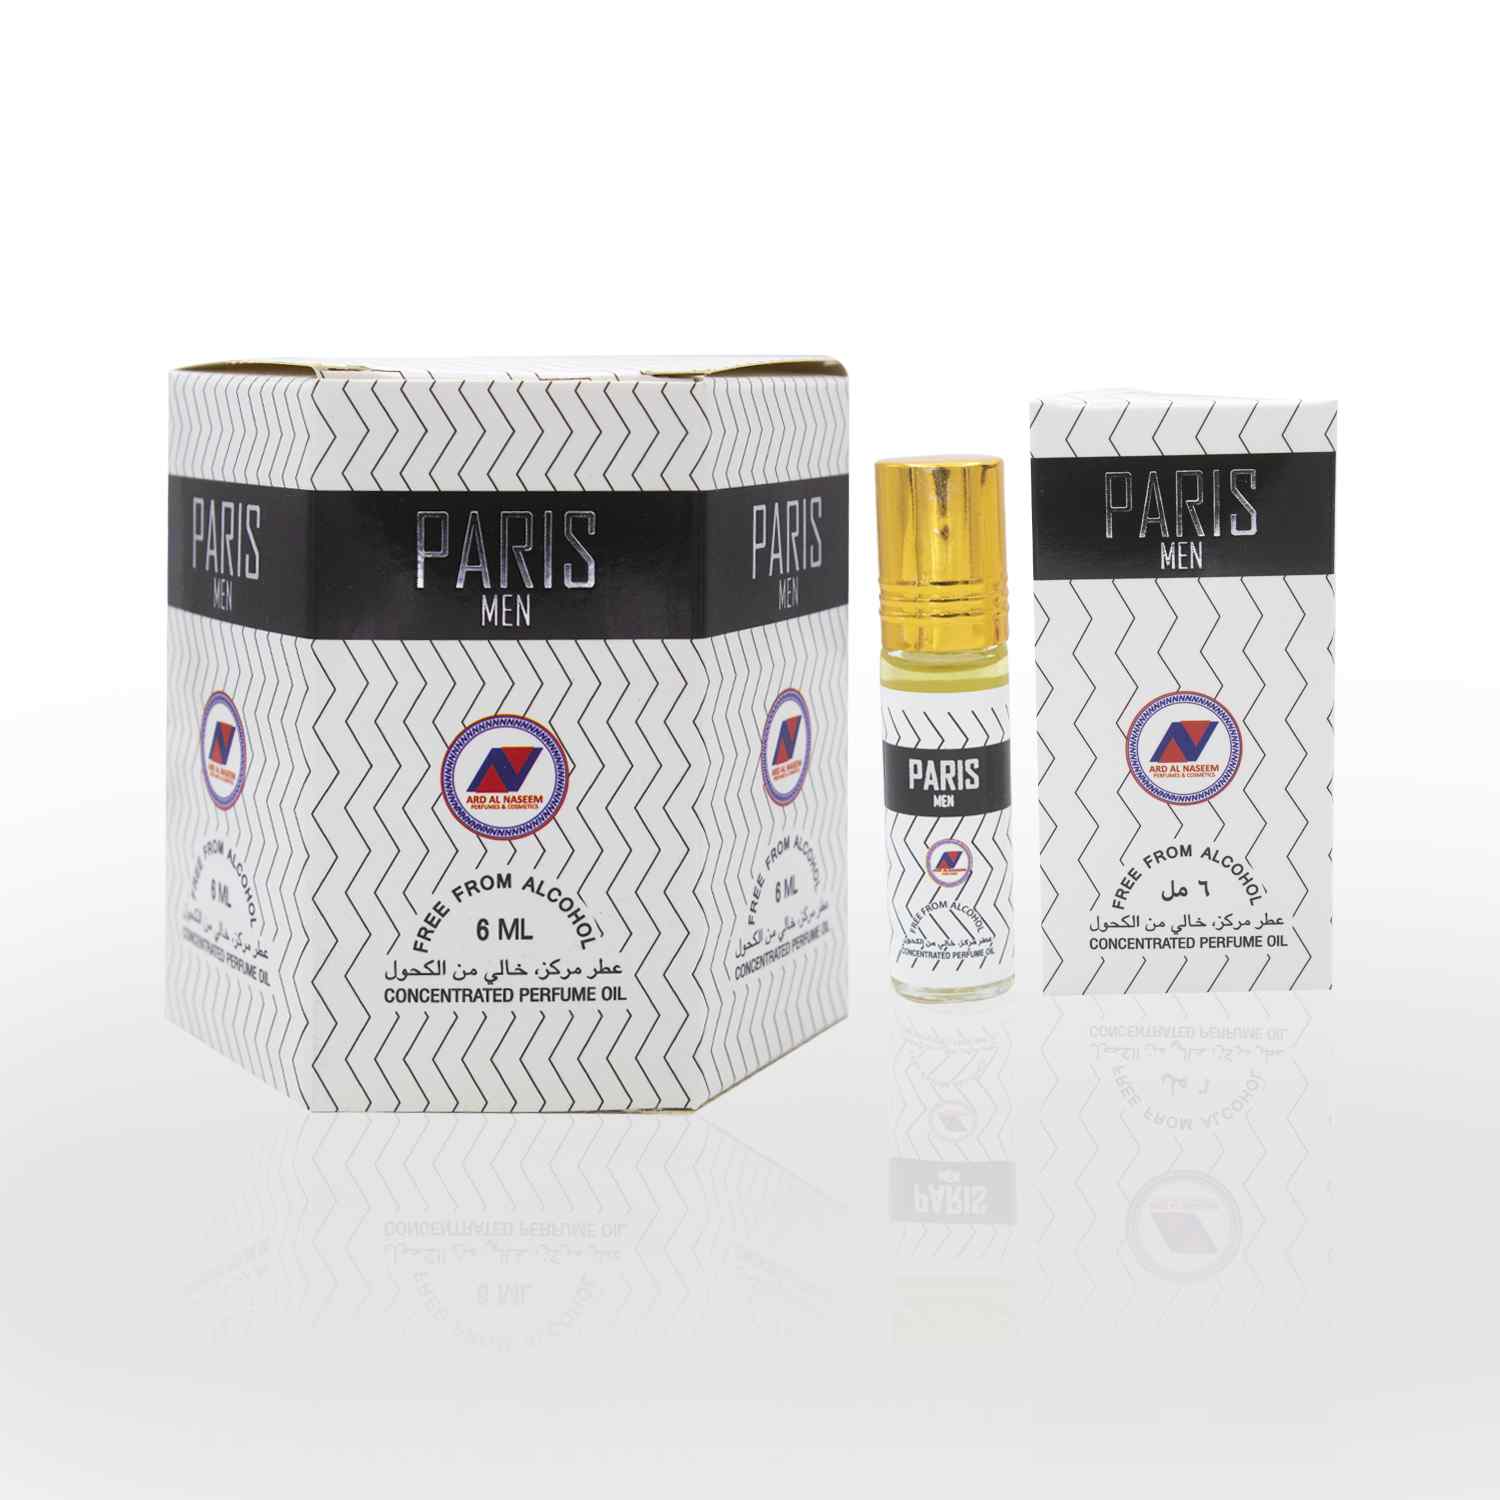 Paris Men 6ml Attar is a concentered perfume oil, free from Alcohol. It is a product of ARD perfumes. Made in UAE